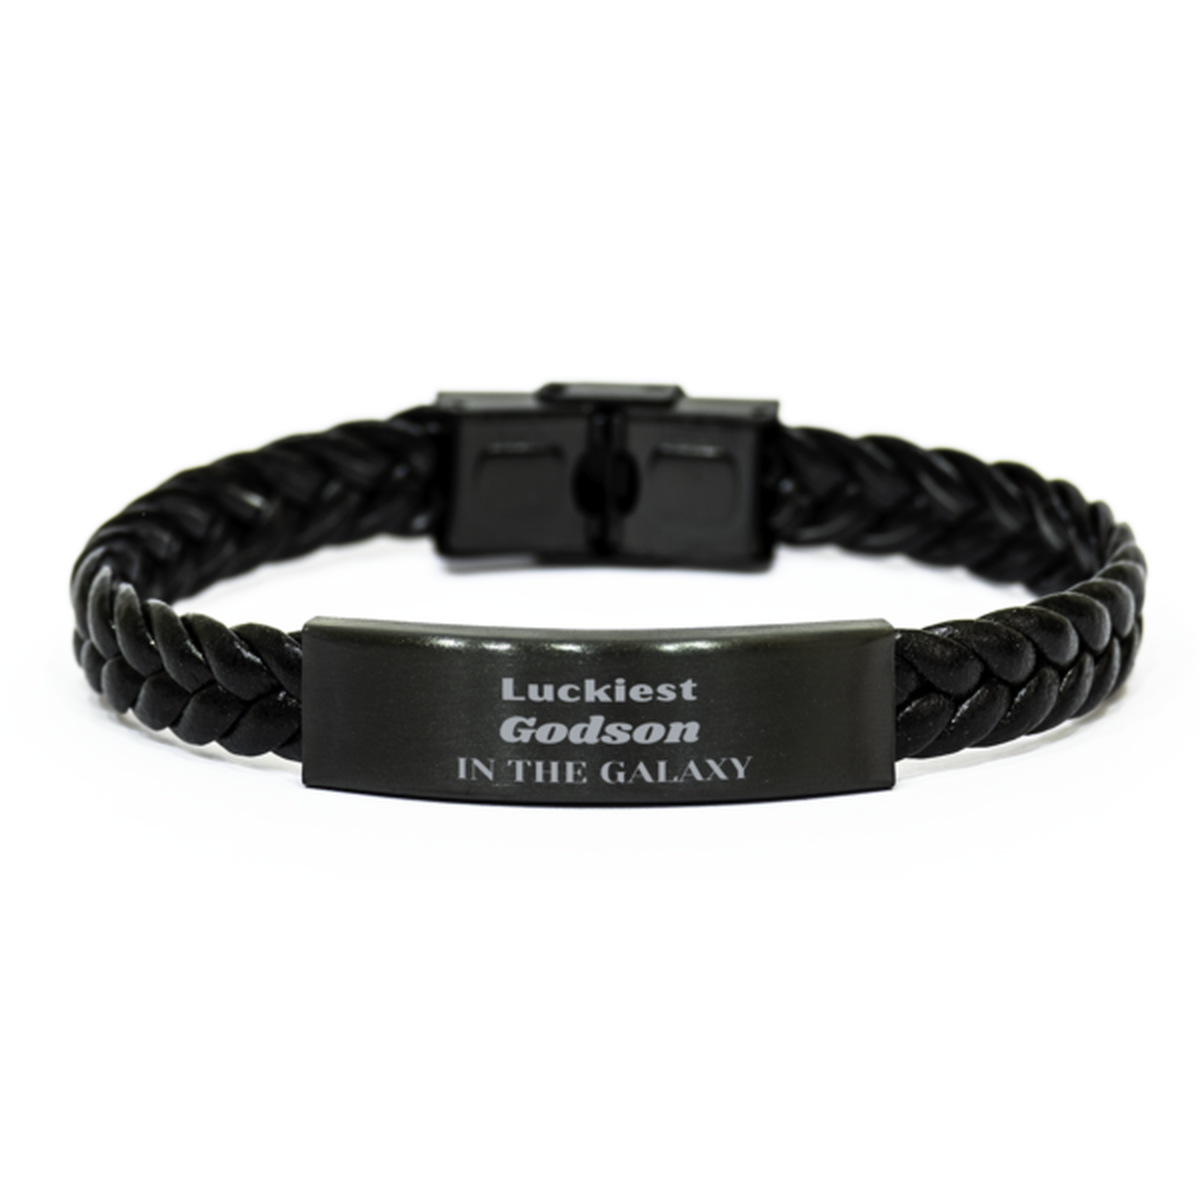 Luckiest Godson in the Galaxy, To My Godson Engraved Gifts, Christmas Godson Braided Leather Bracelet Gifts, X-mas Birthday Unique Gifts For Godson Men Women